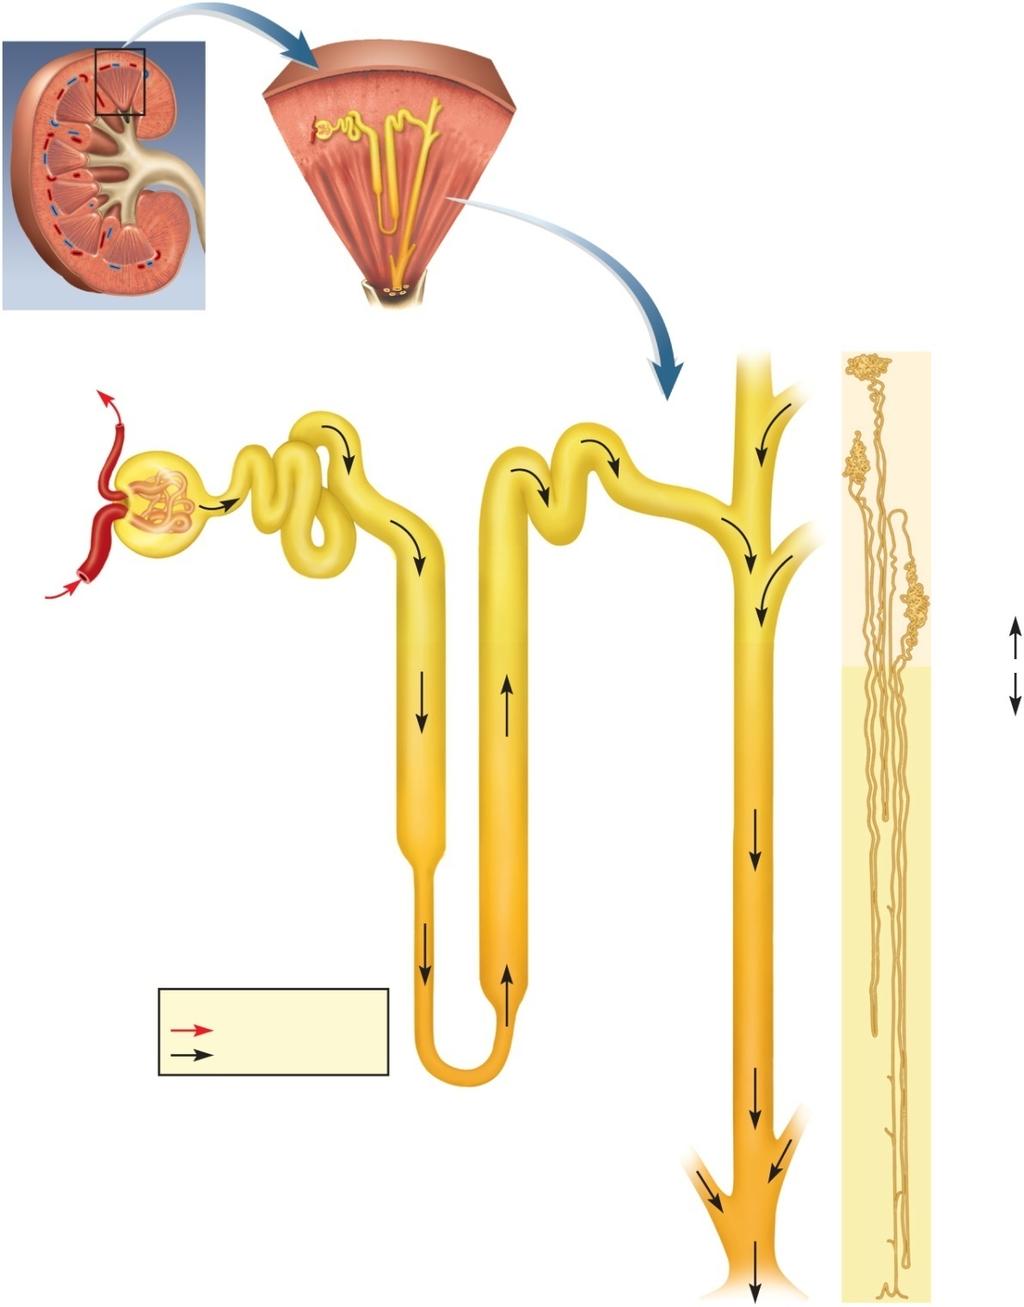 papilla CorHcal nephron Convoluted tubules (PCT and DCT) Afferent arteriole Proximal convoluted tubule (PCT) Distal convoluted tubule (DCT)